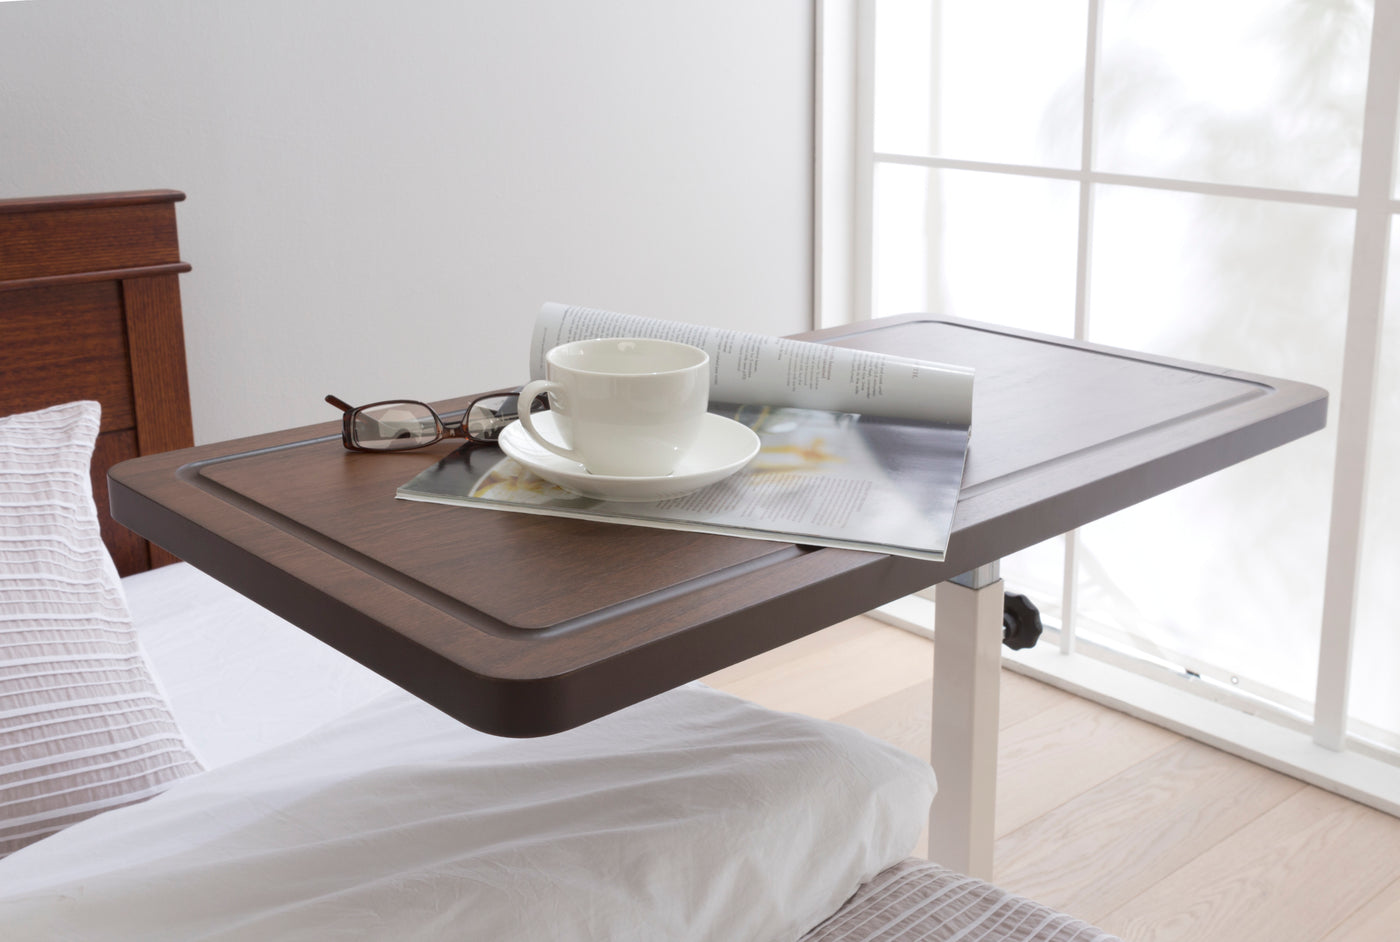 Why offer an overbed table?